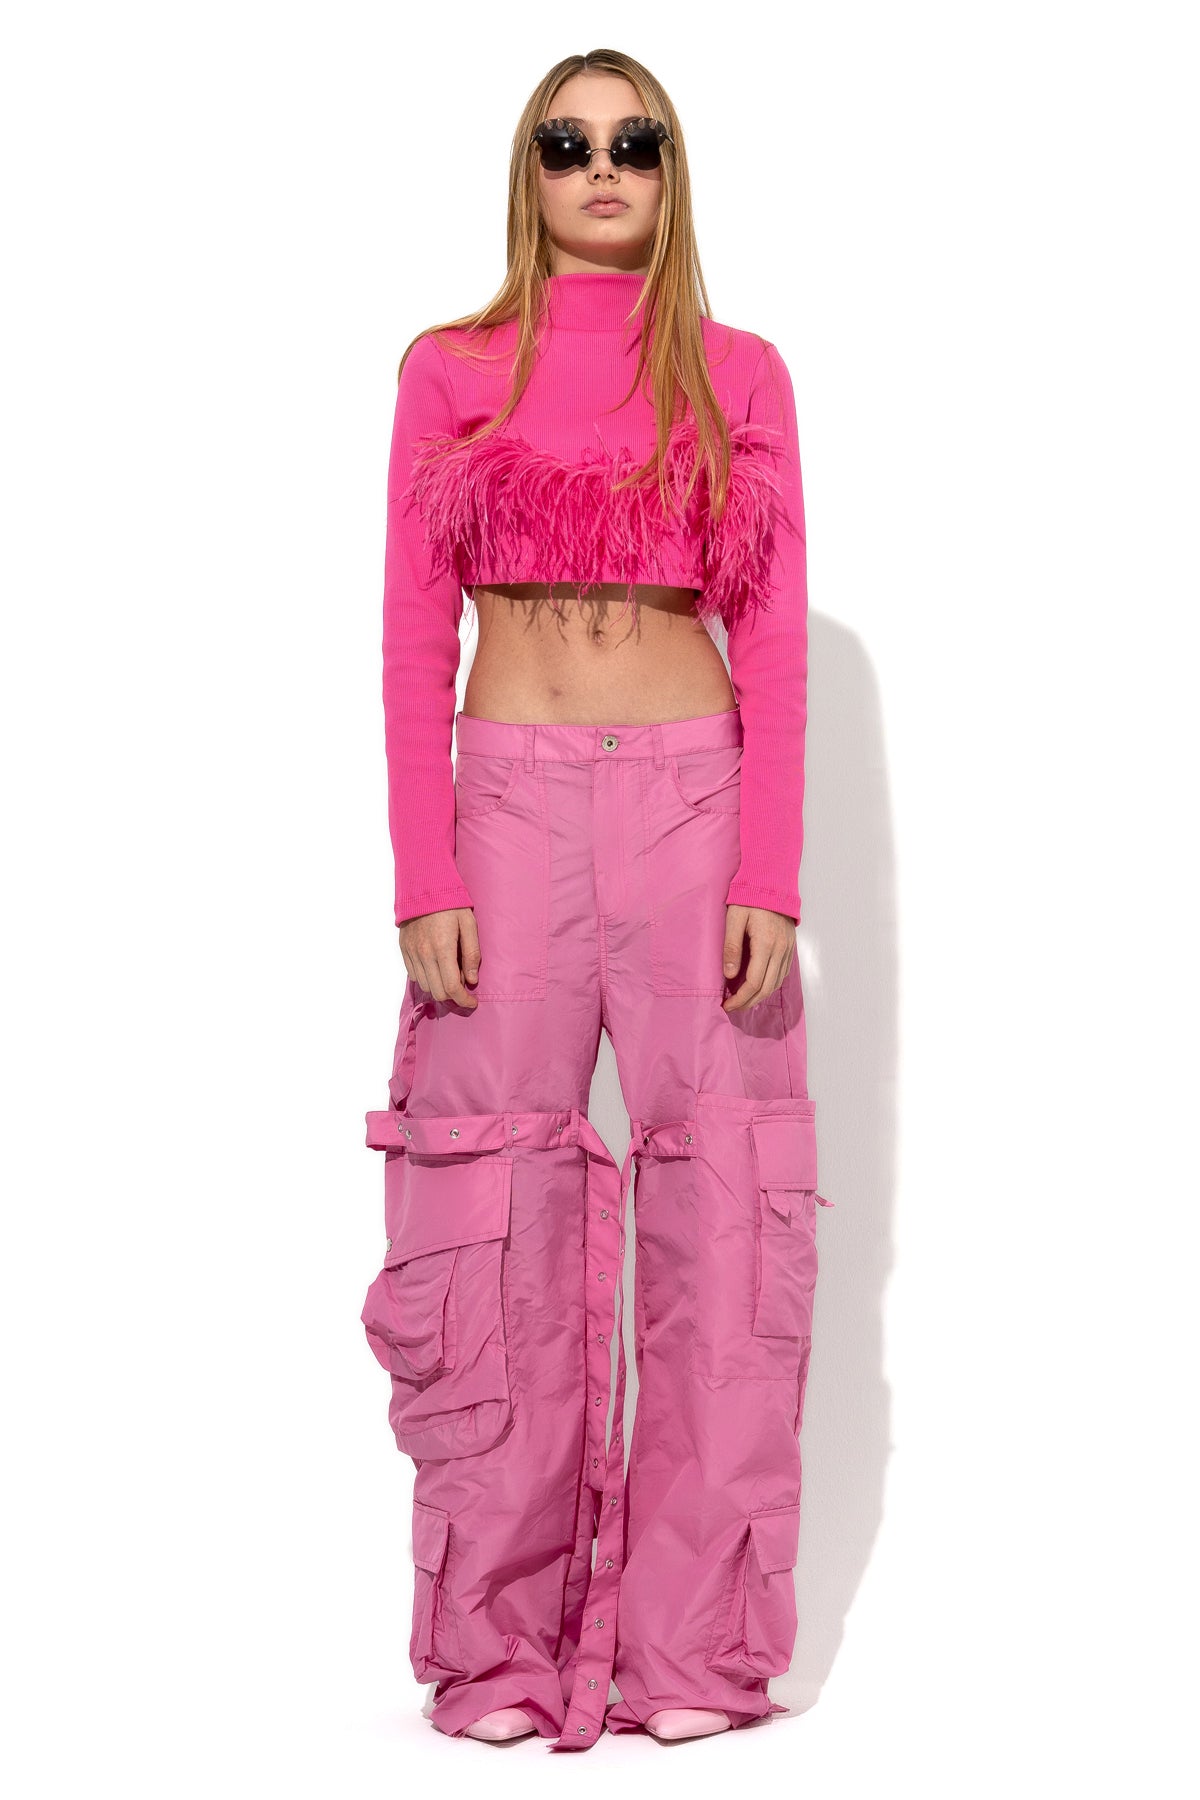 PINK CROPPED FEATHER TOP marques almeida